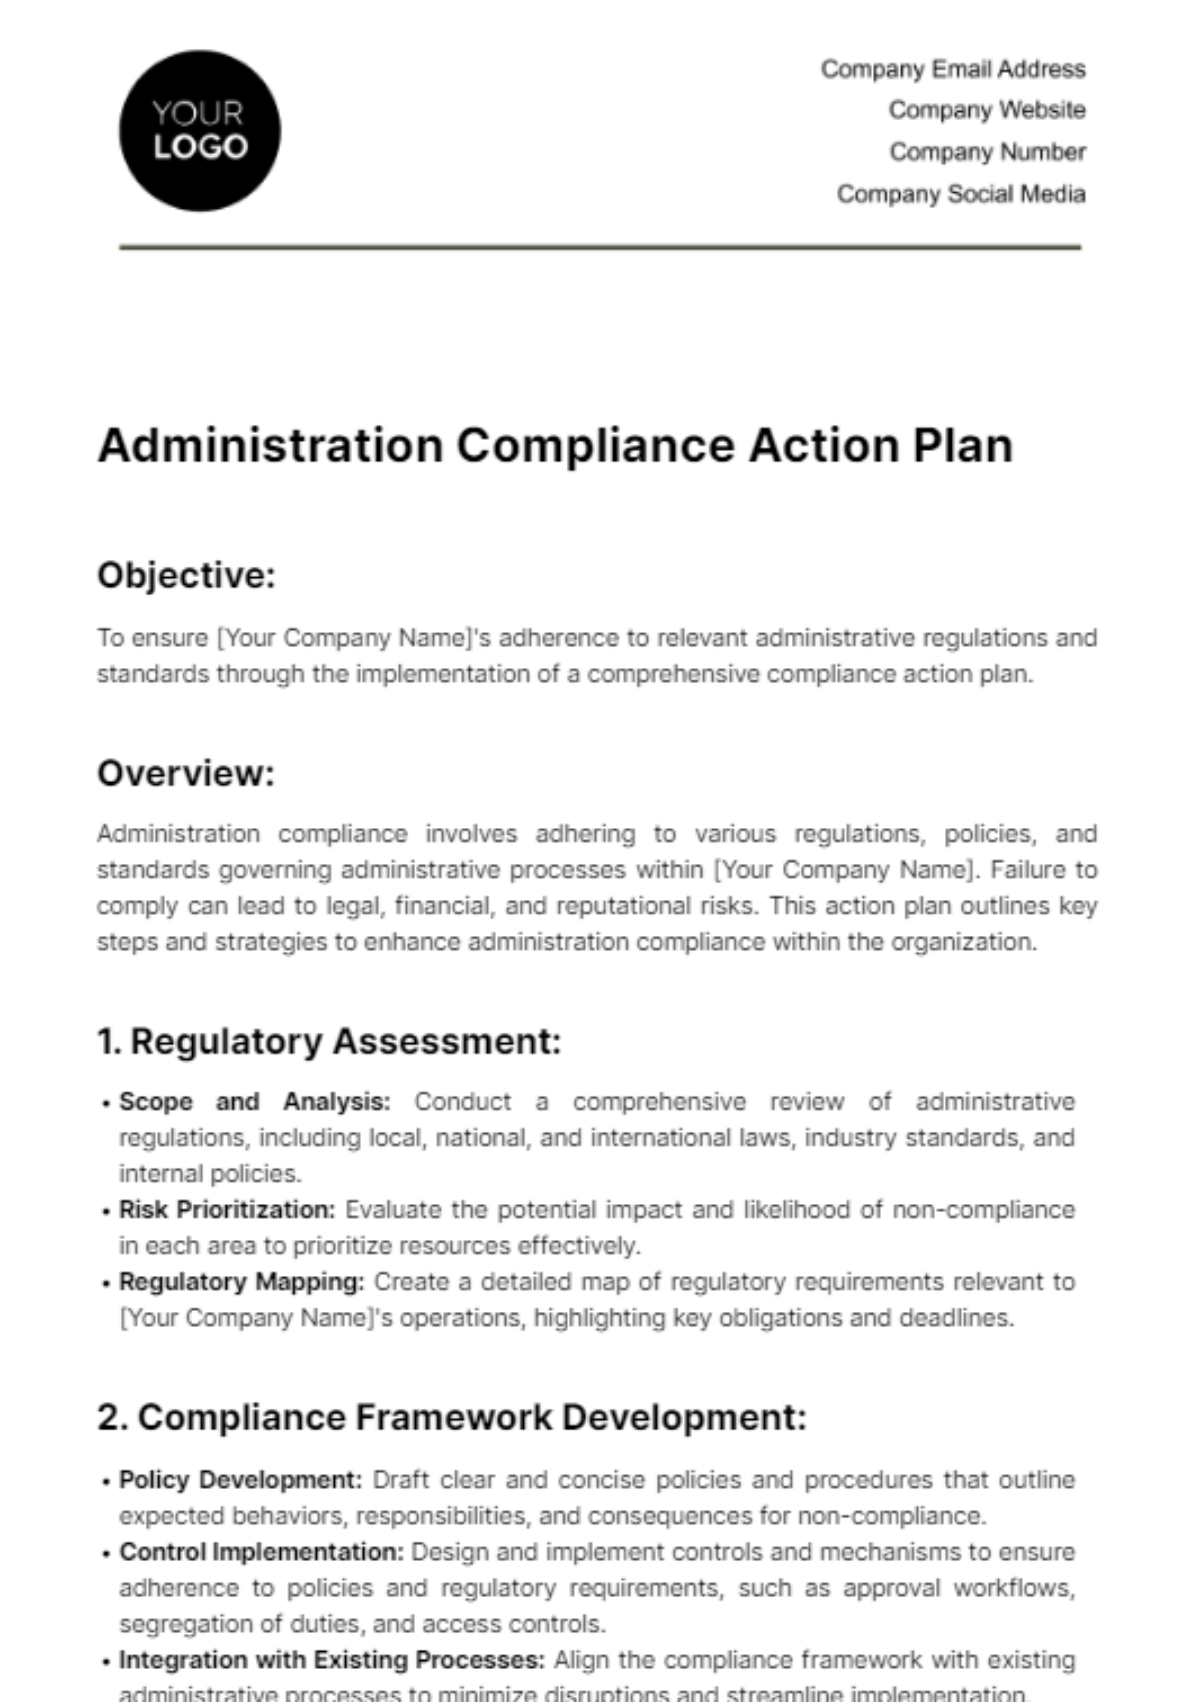 Administration Compliance Action Plan Template